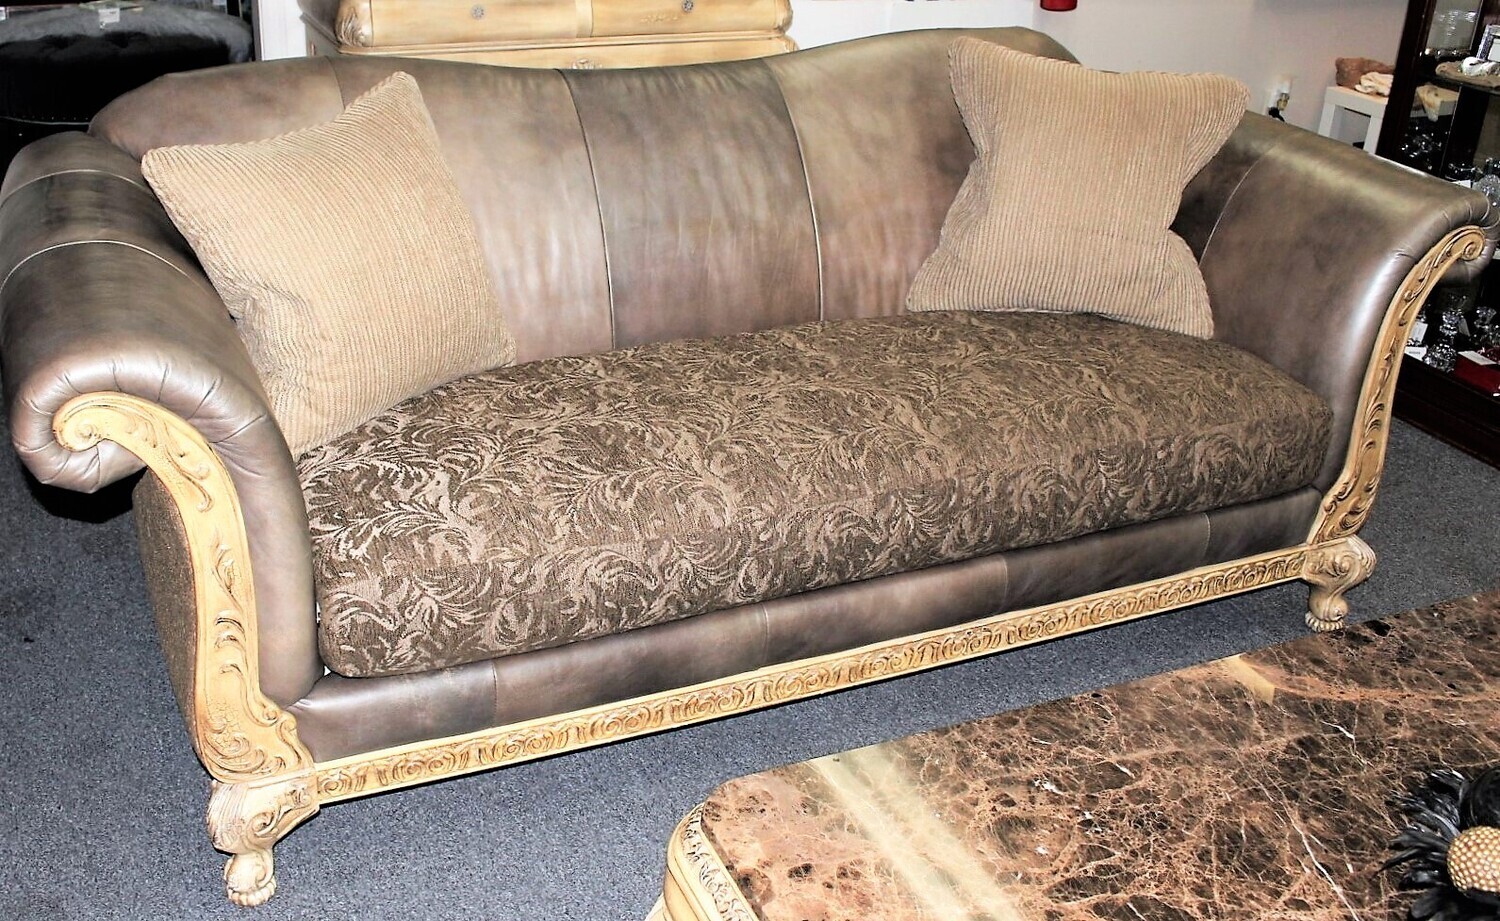 Schnadig Empire Collection High-End Carved Wood Sofa with Bench Seat Cushion